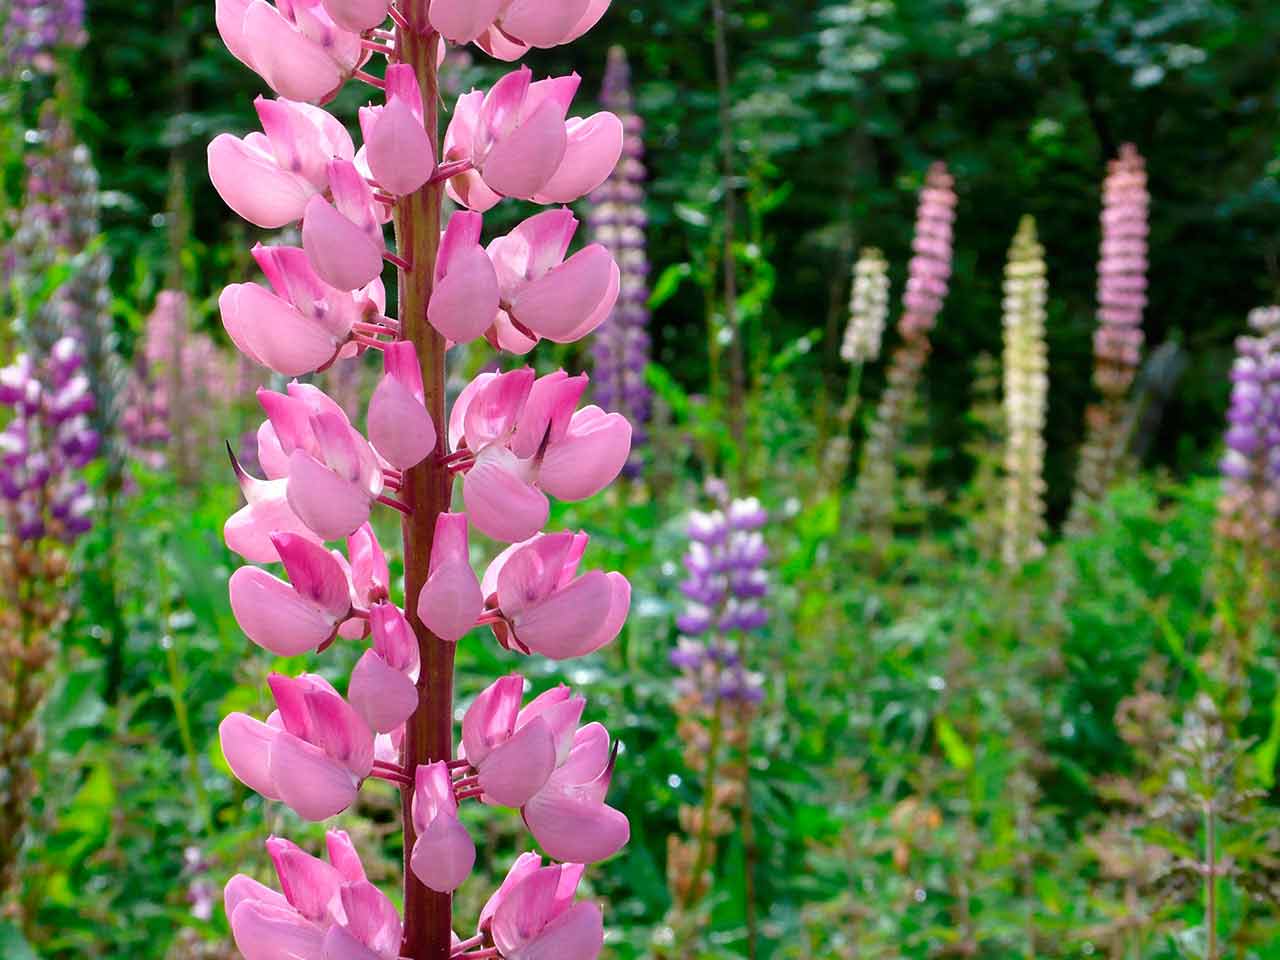 Lupins growing in garden with tall pink in the foreground